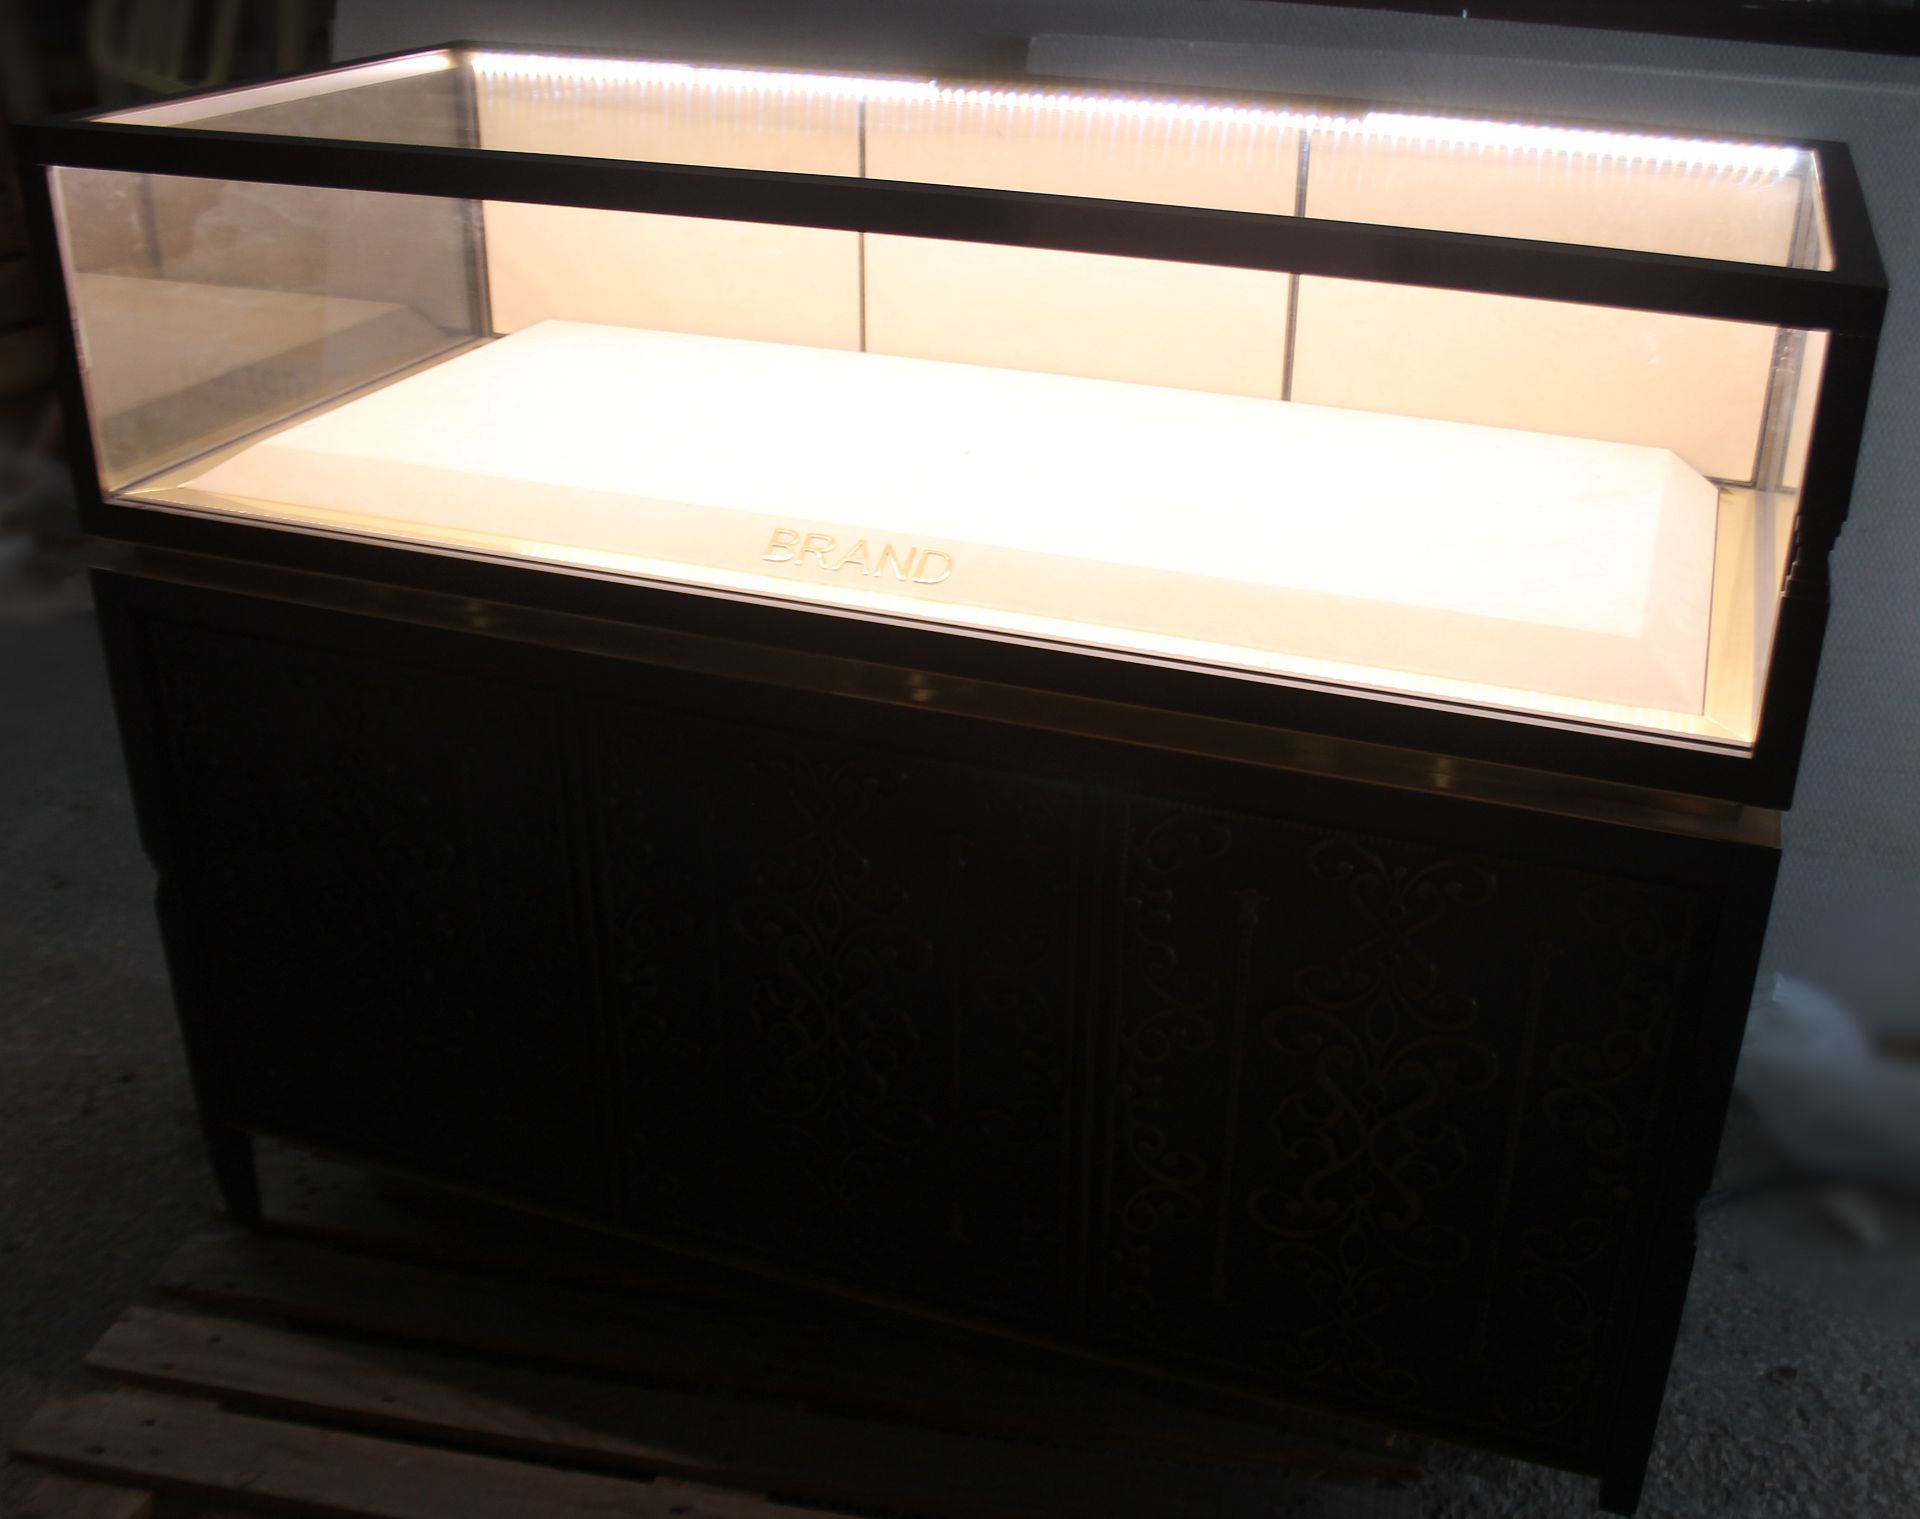 1 x Commercial 3-Door Retail Counter / Illuminated Display Case With A Gun Metal Finish - Ex-Display - Image 5 of 18